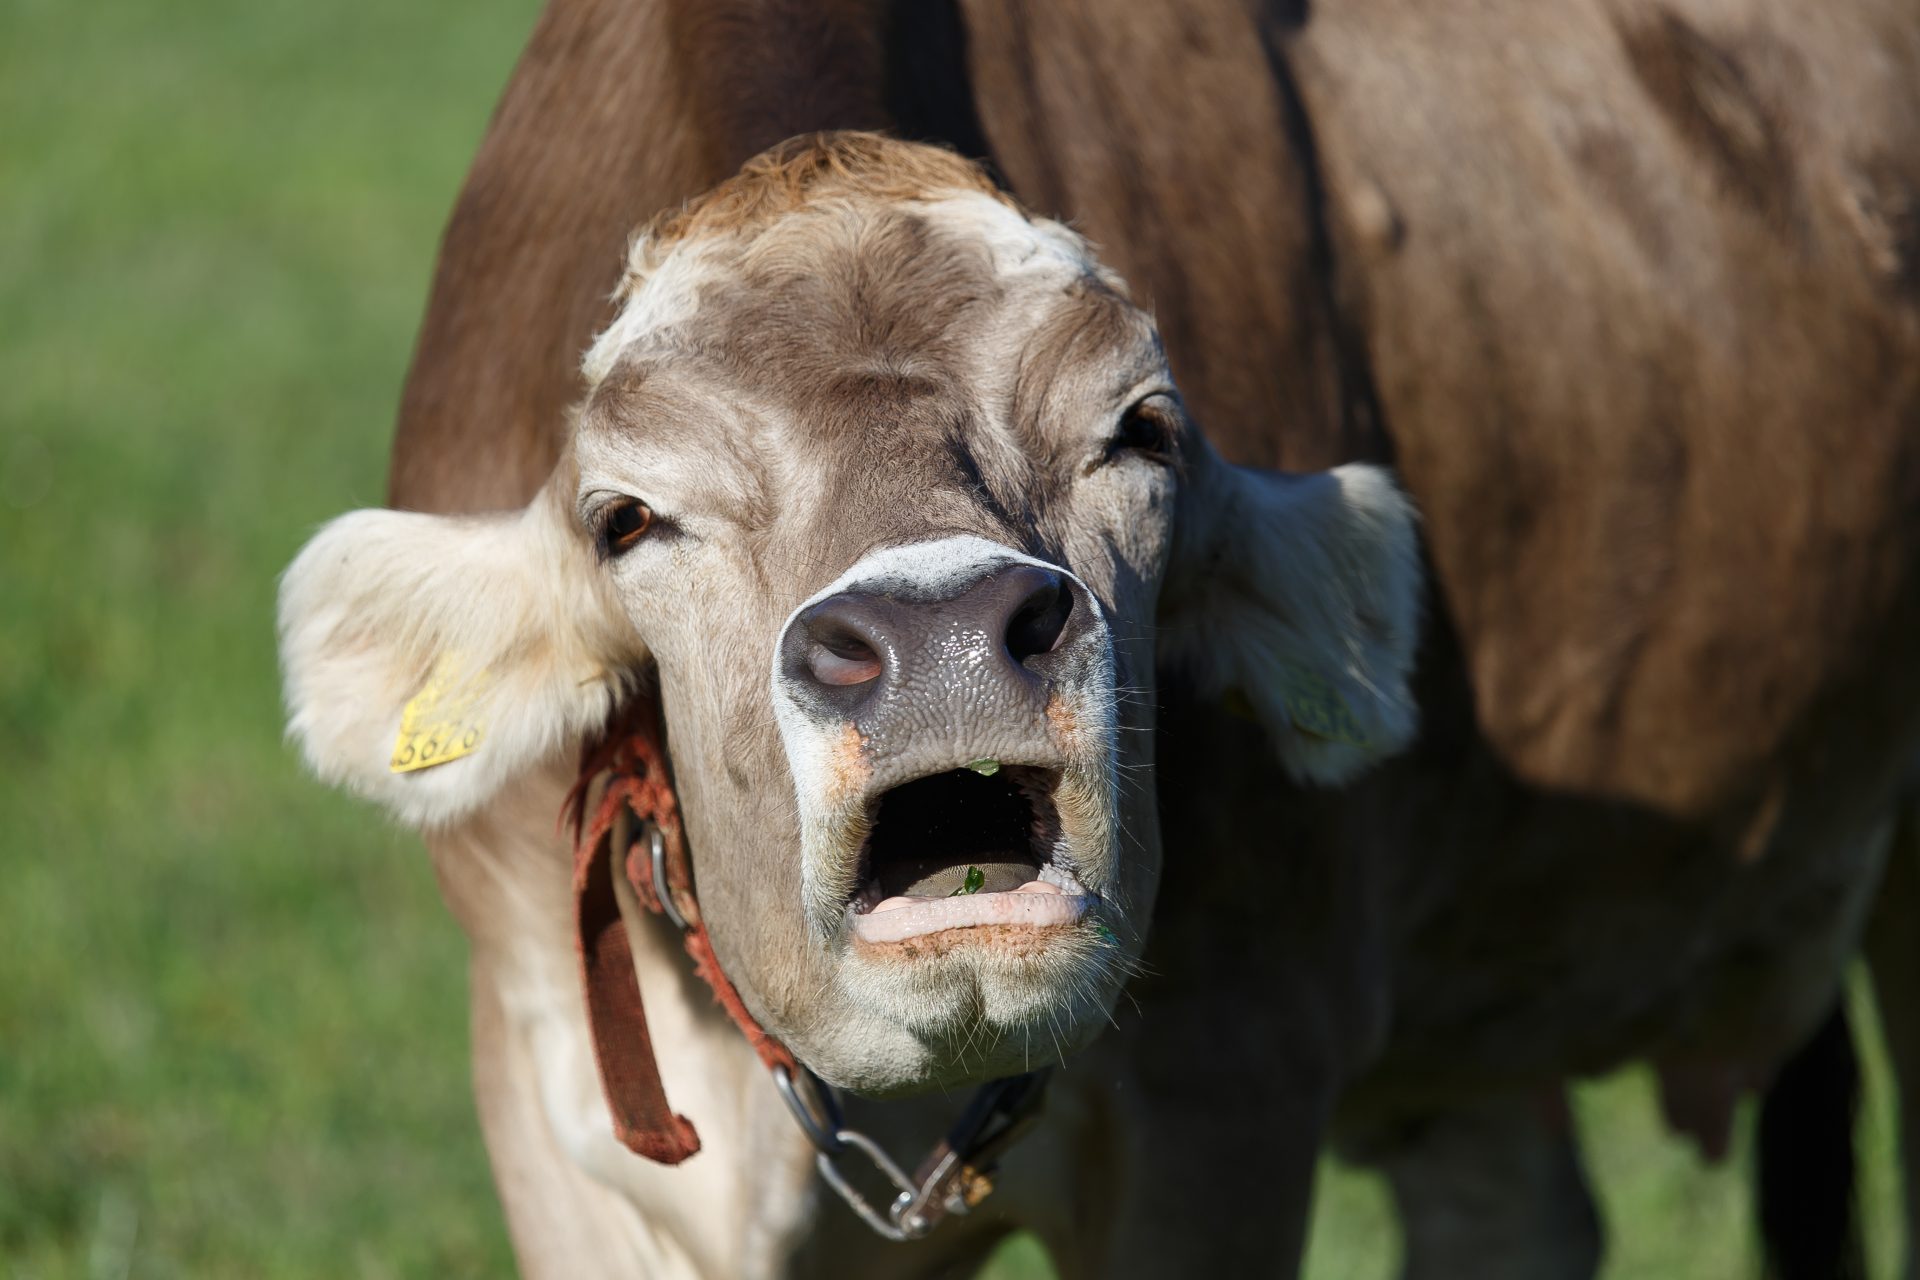 Is a 'cow burp tax' the solution to climate change?